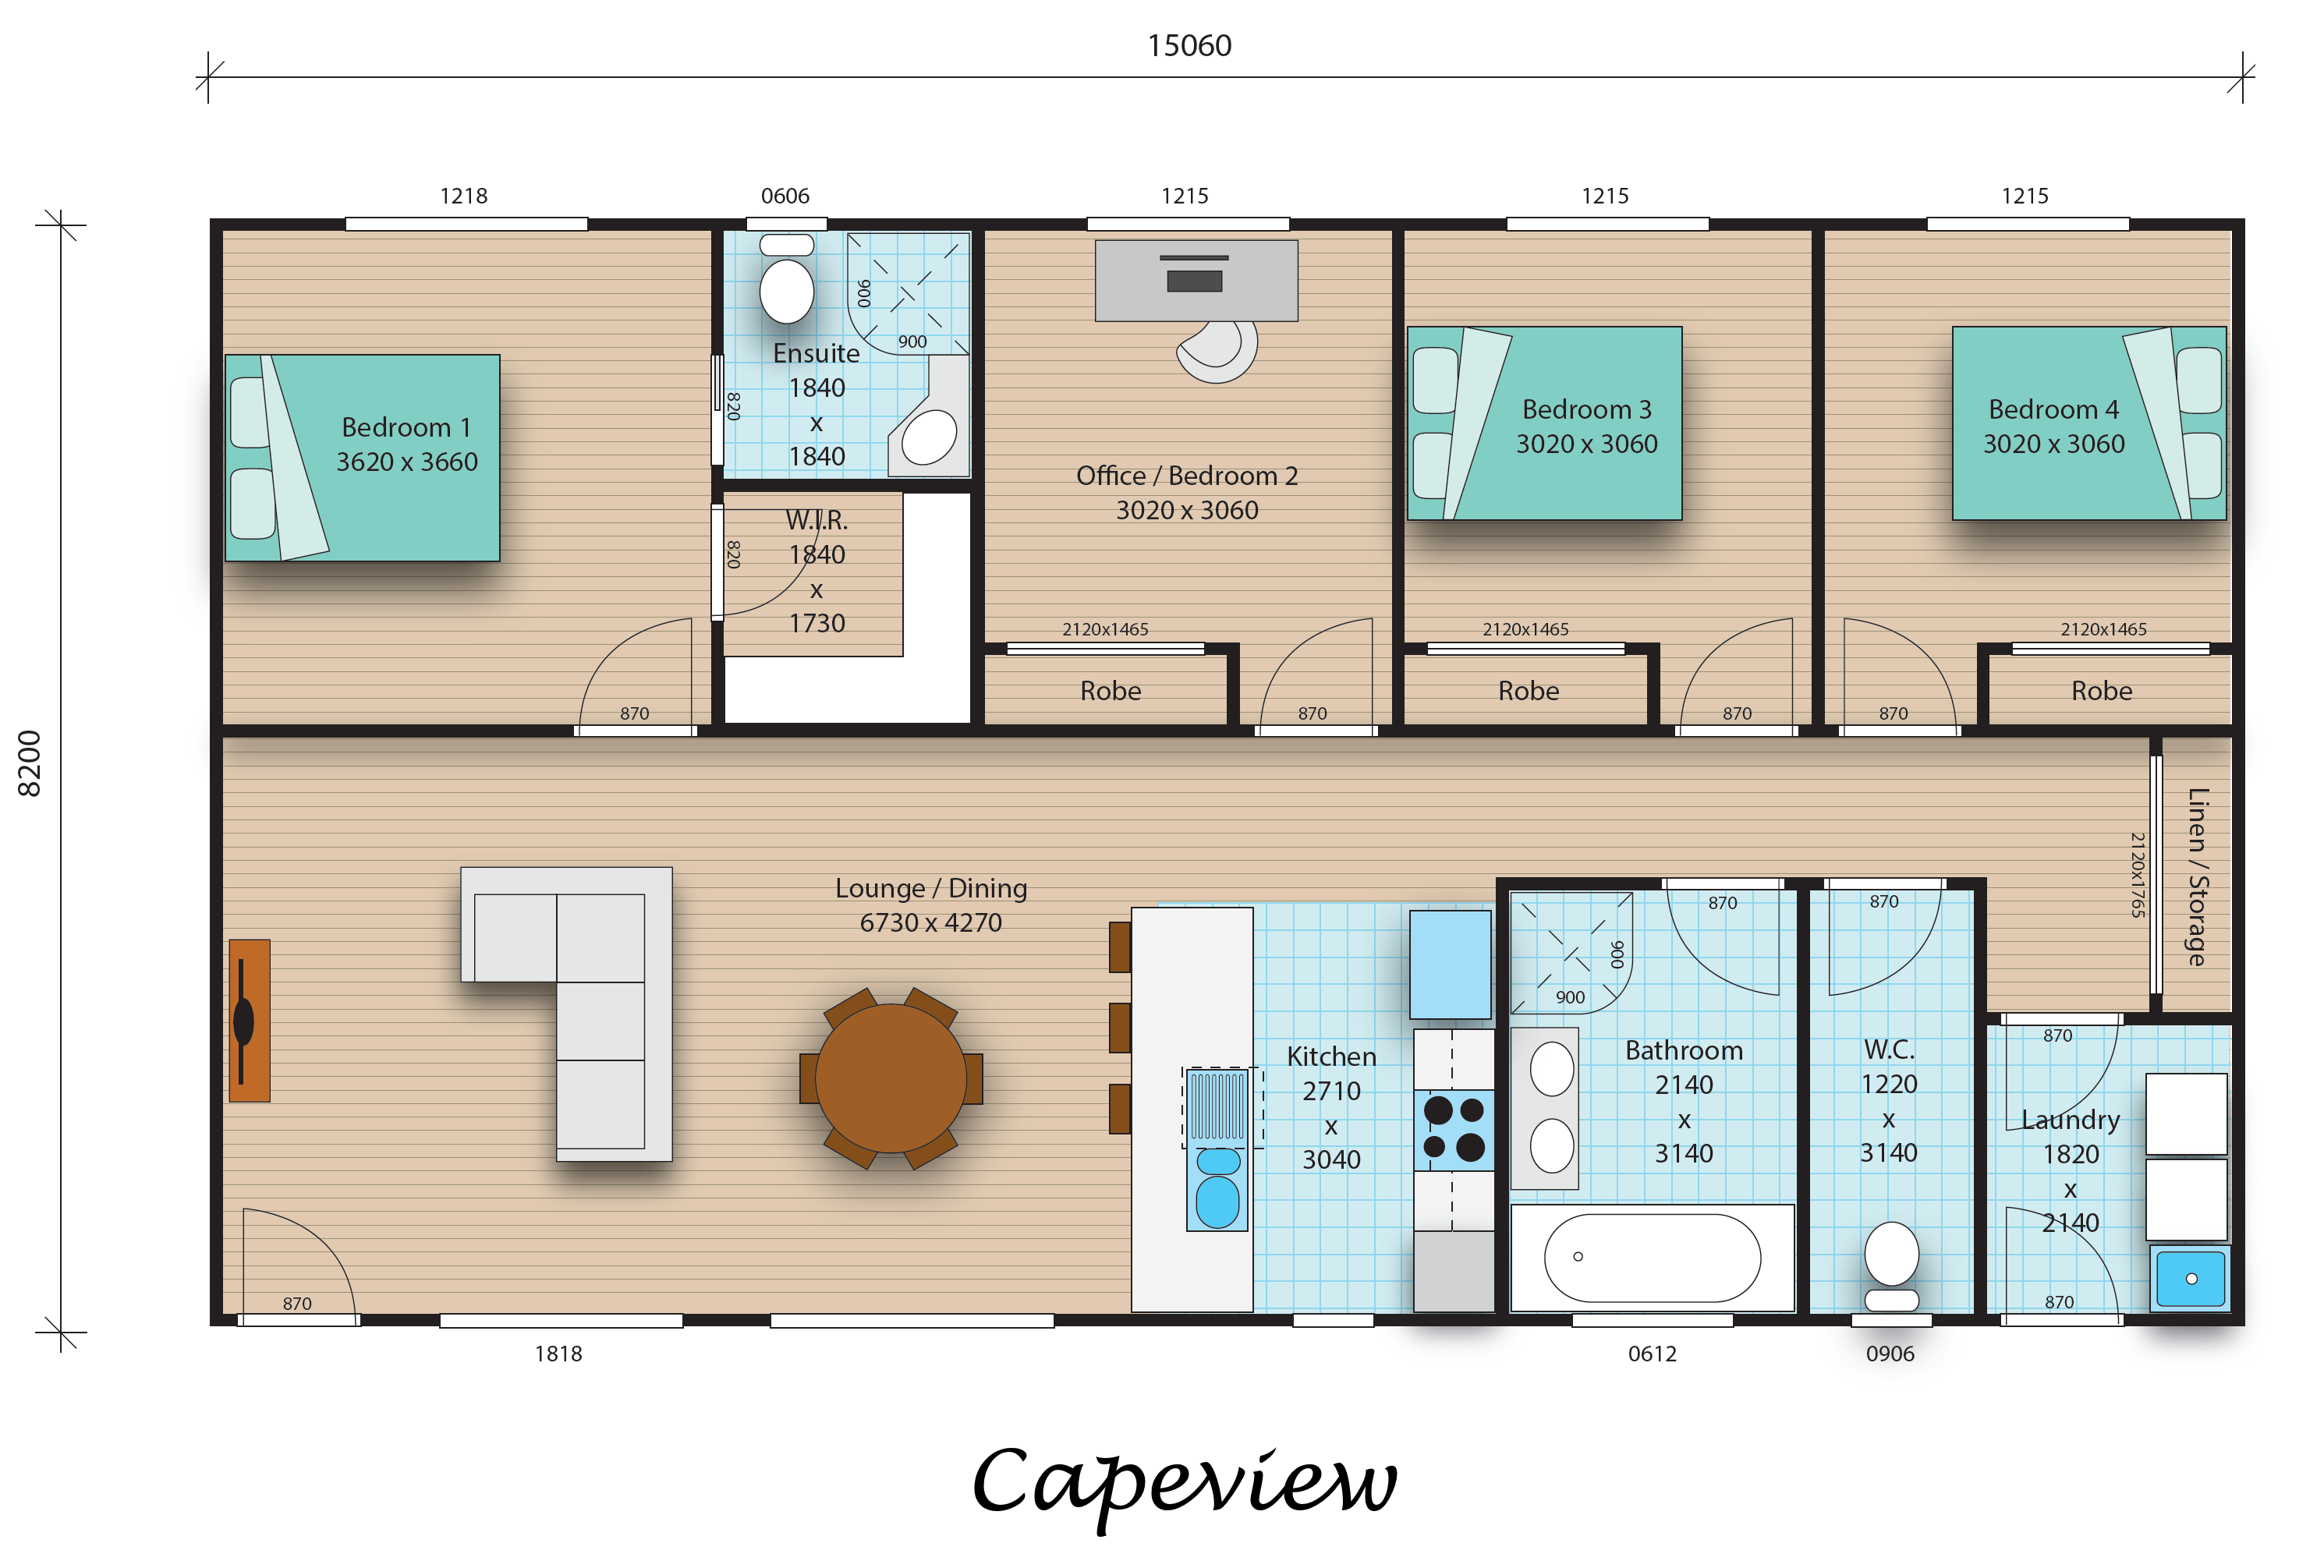 Capeview floorplan image